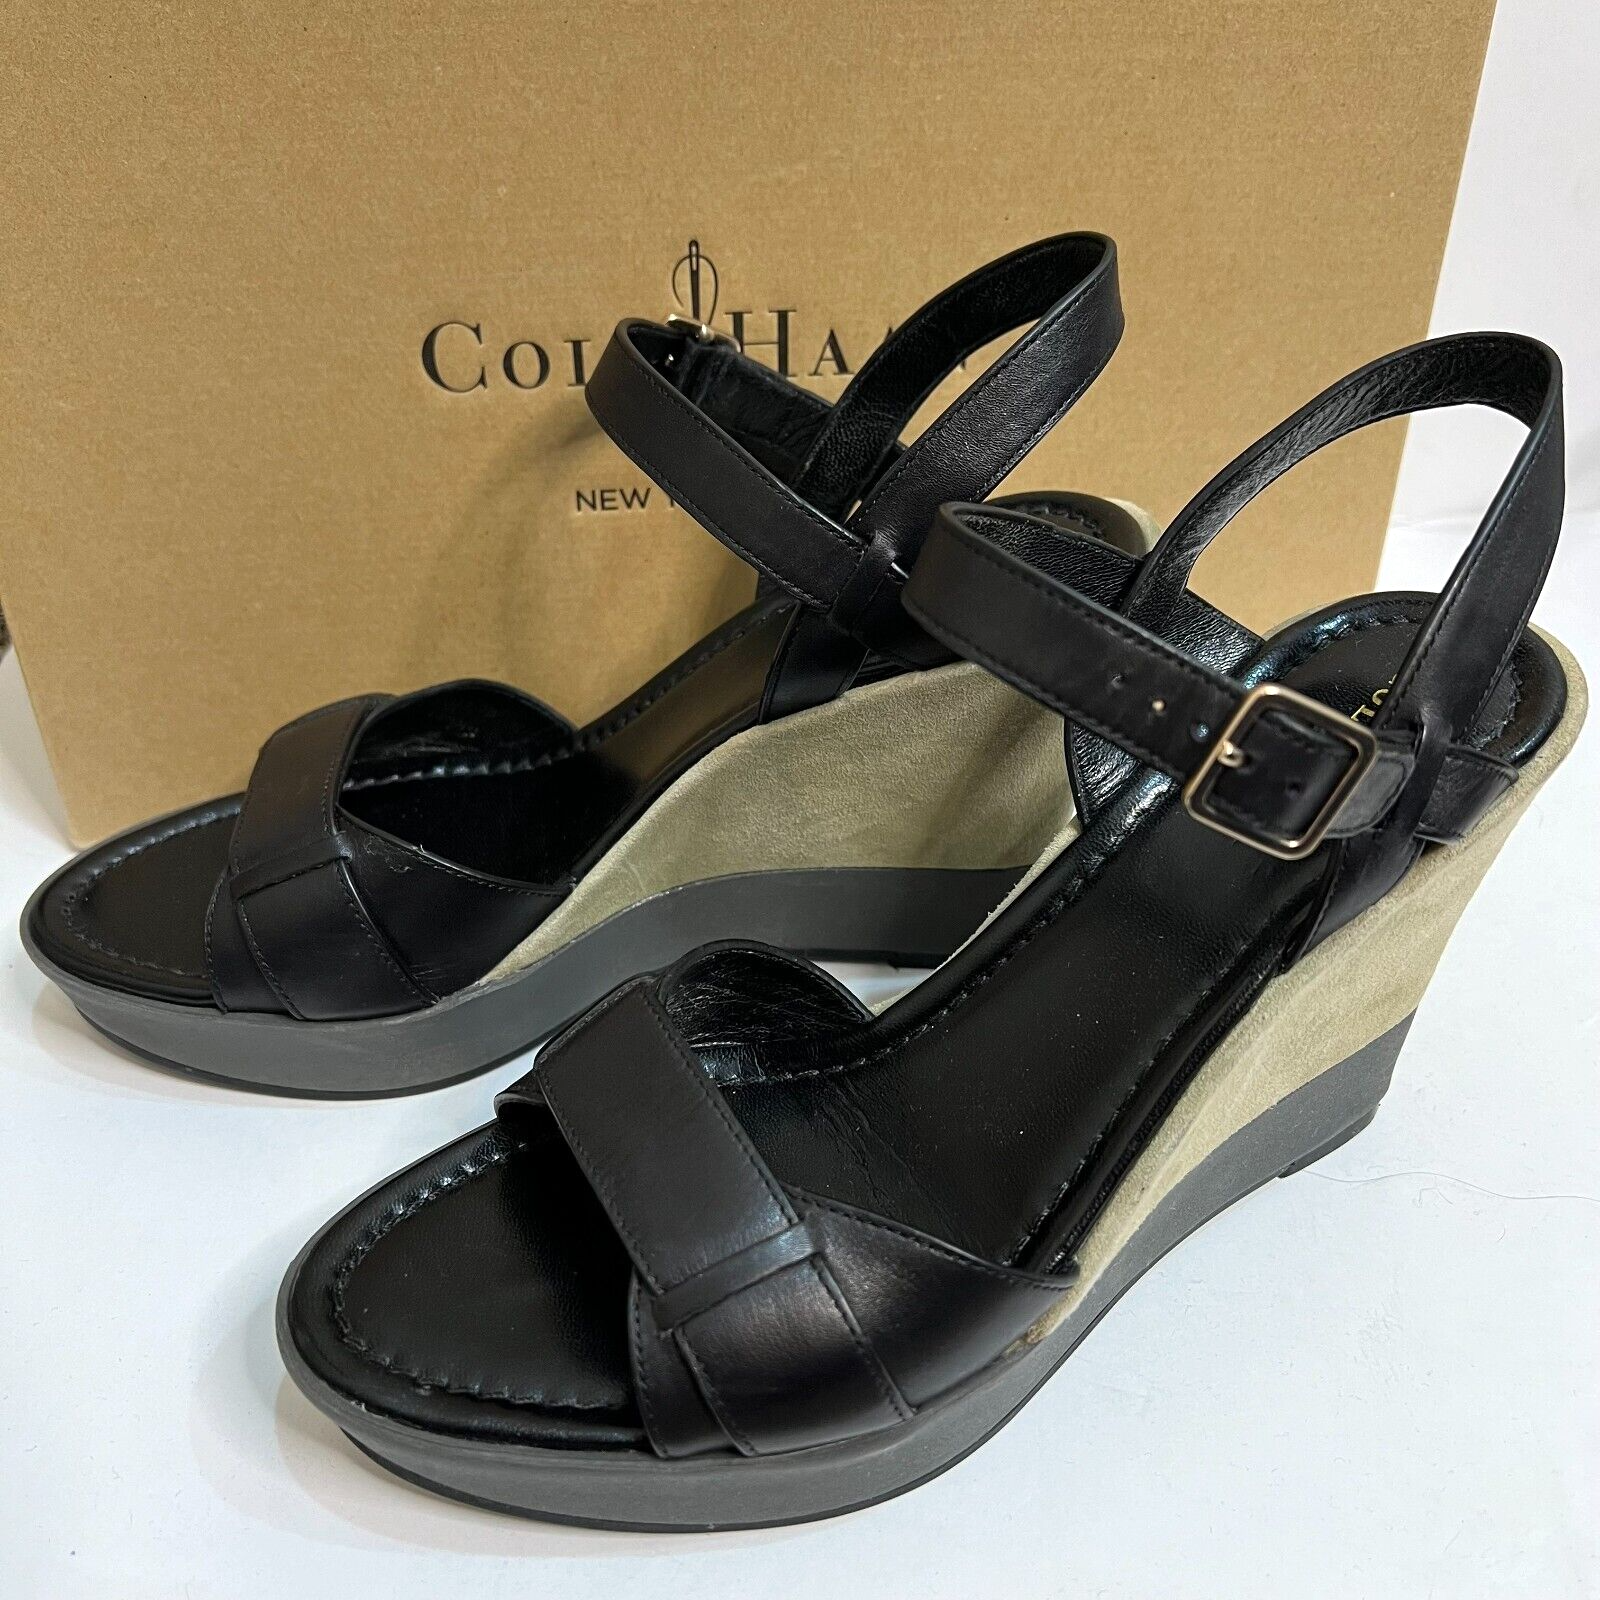 Cole Haan Paley High Wedge Sandal in Black Khaki Suede Size 7